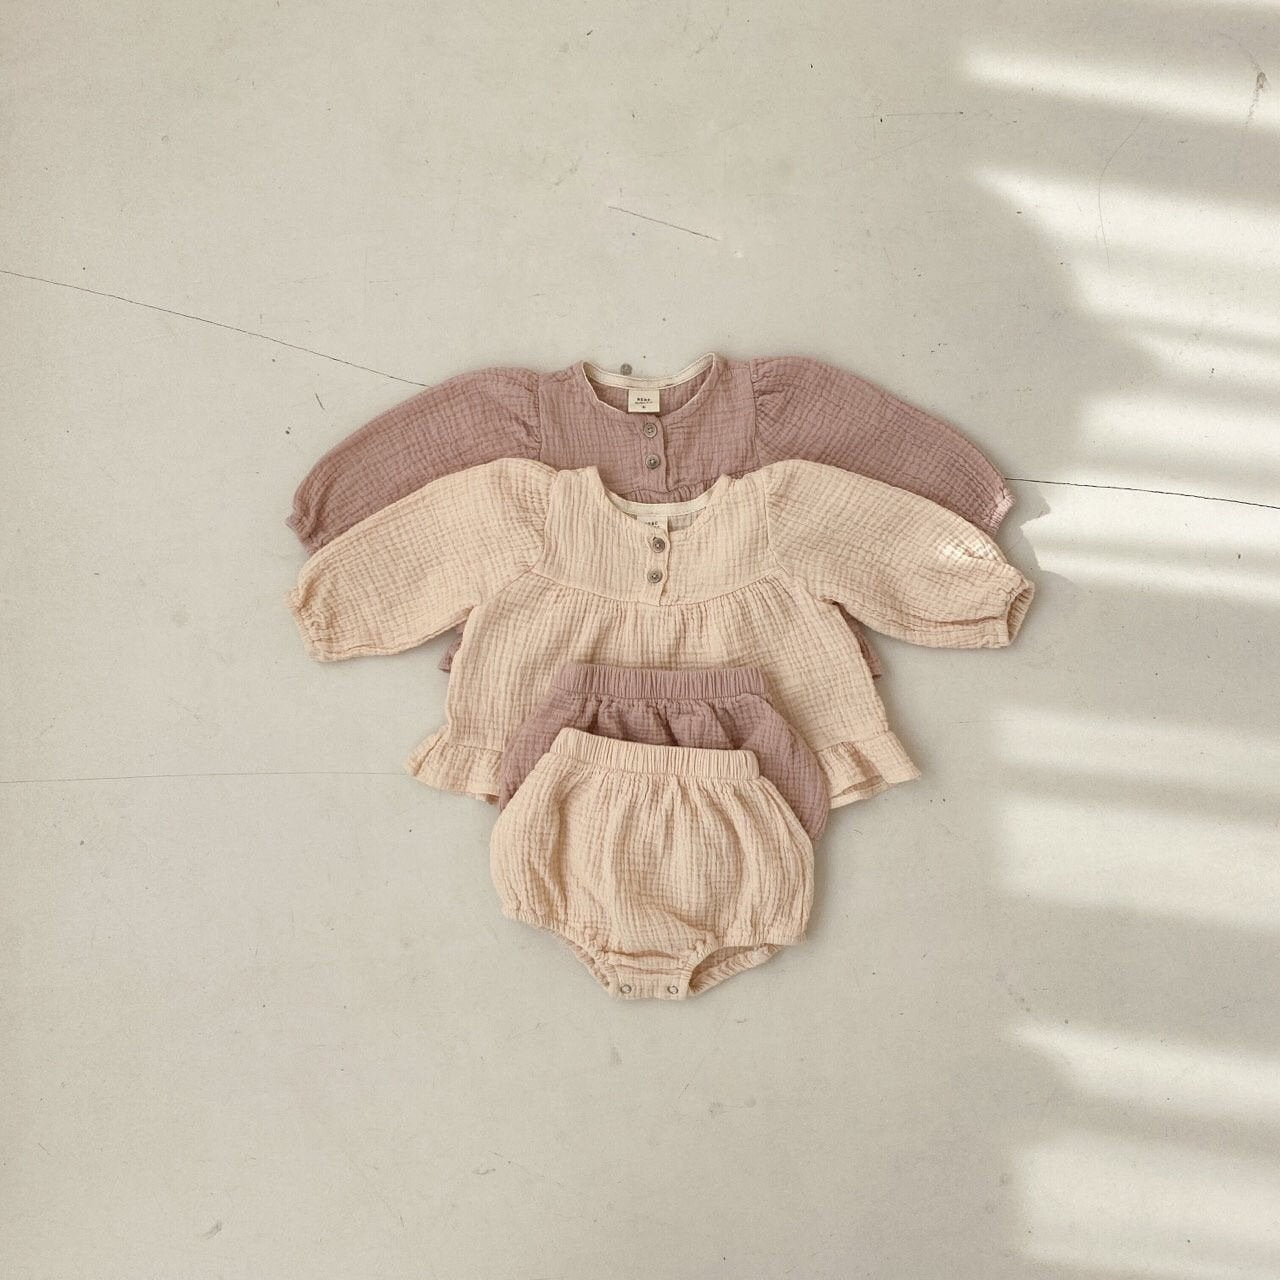 Mini Gauze Top Bloomer Set find Stylish Fashion for Little People- at Little Foxx Concept Store